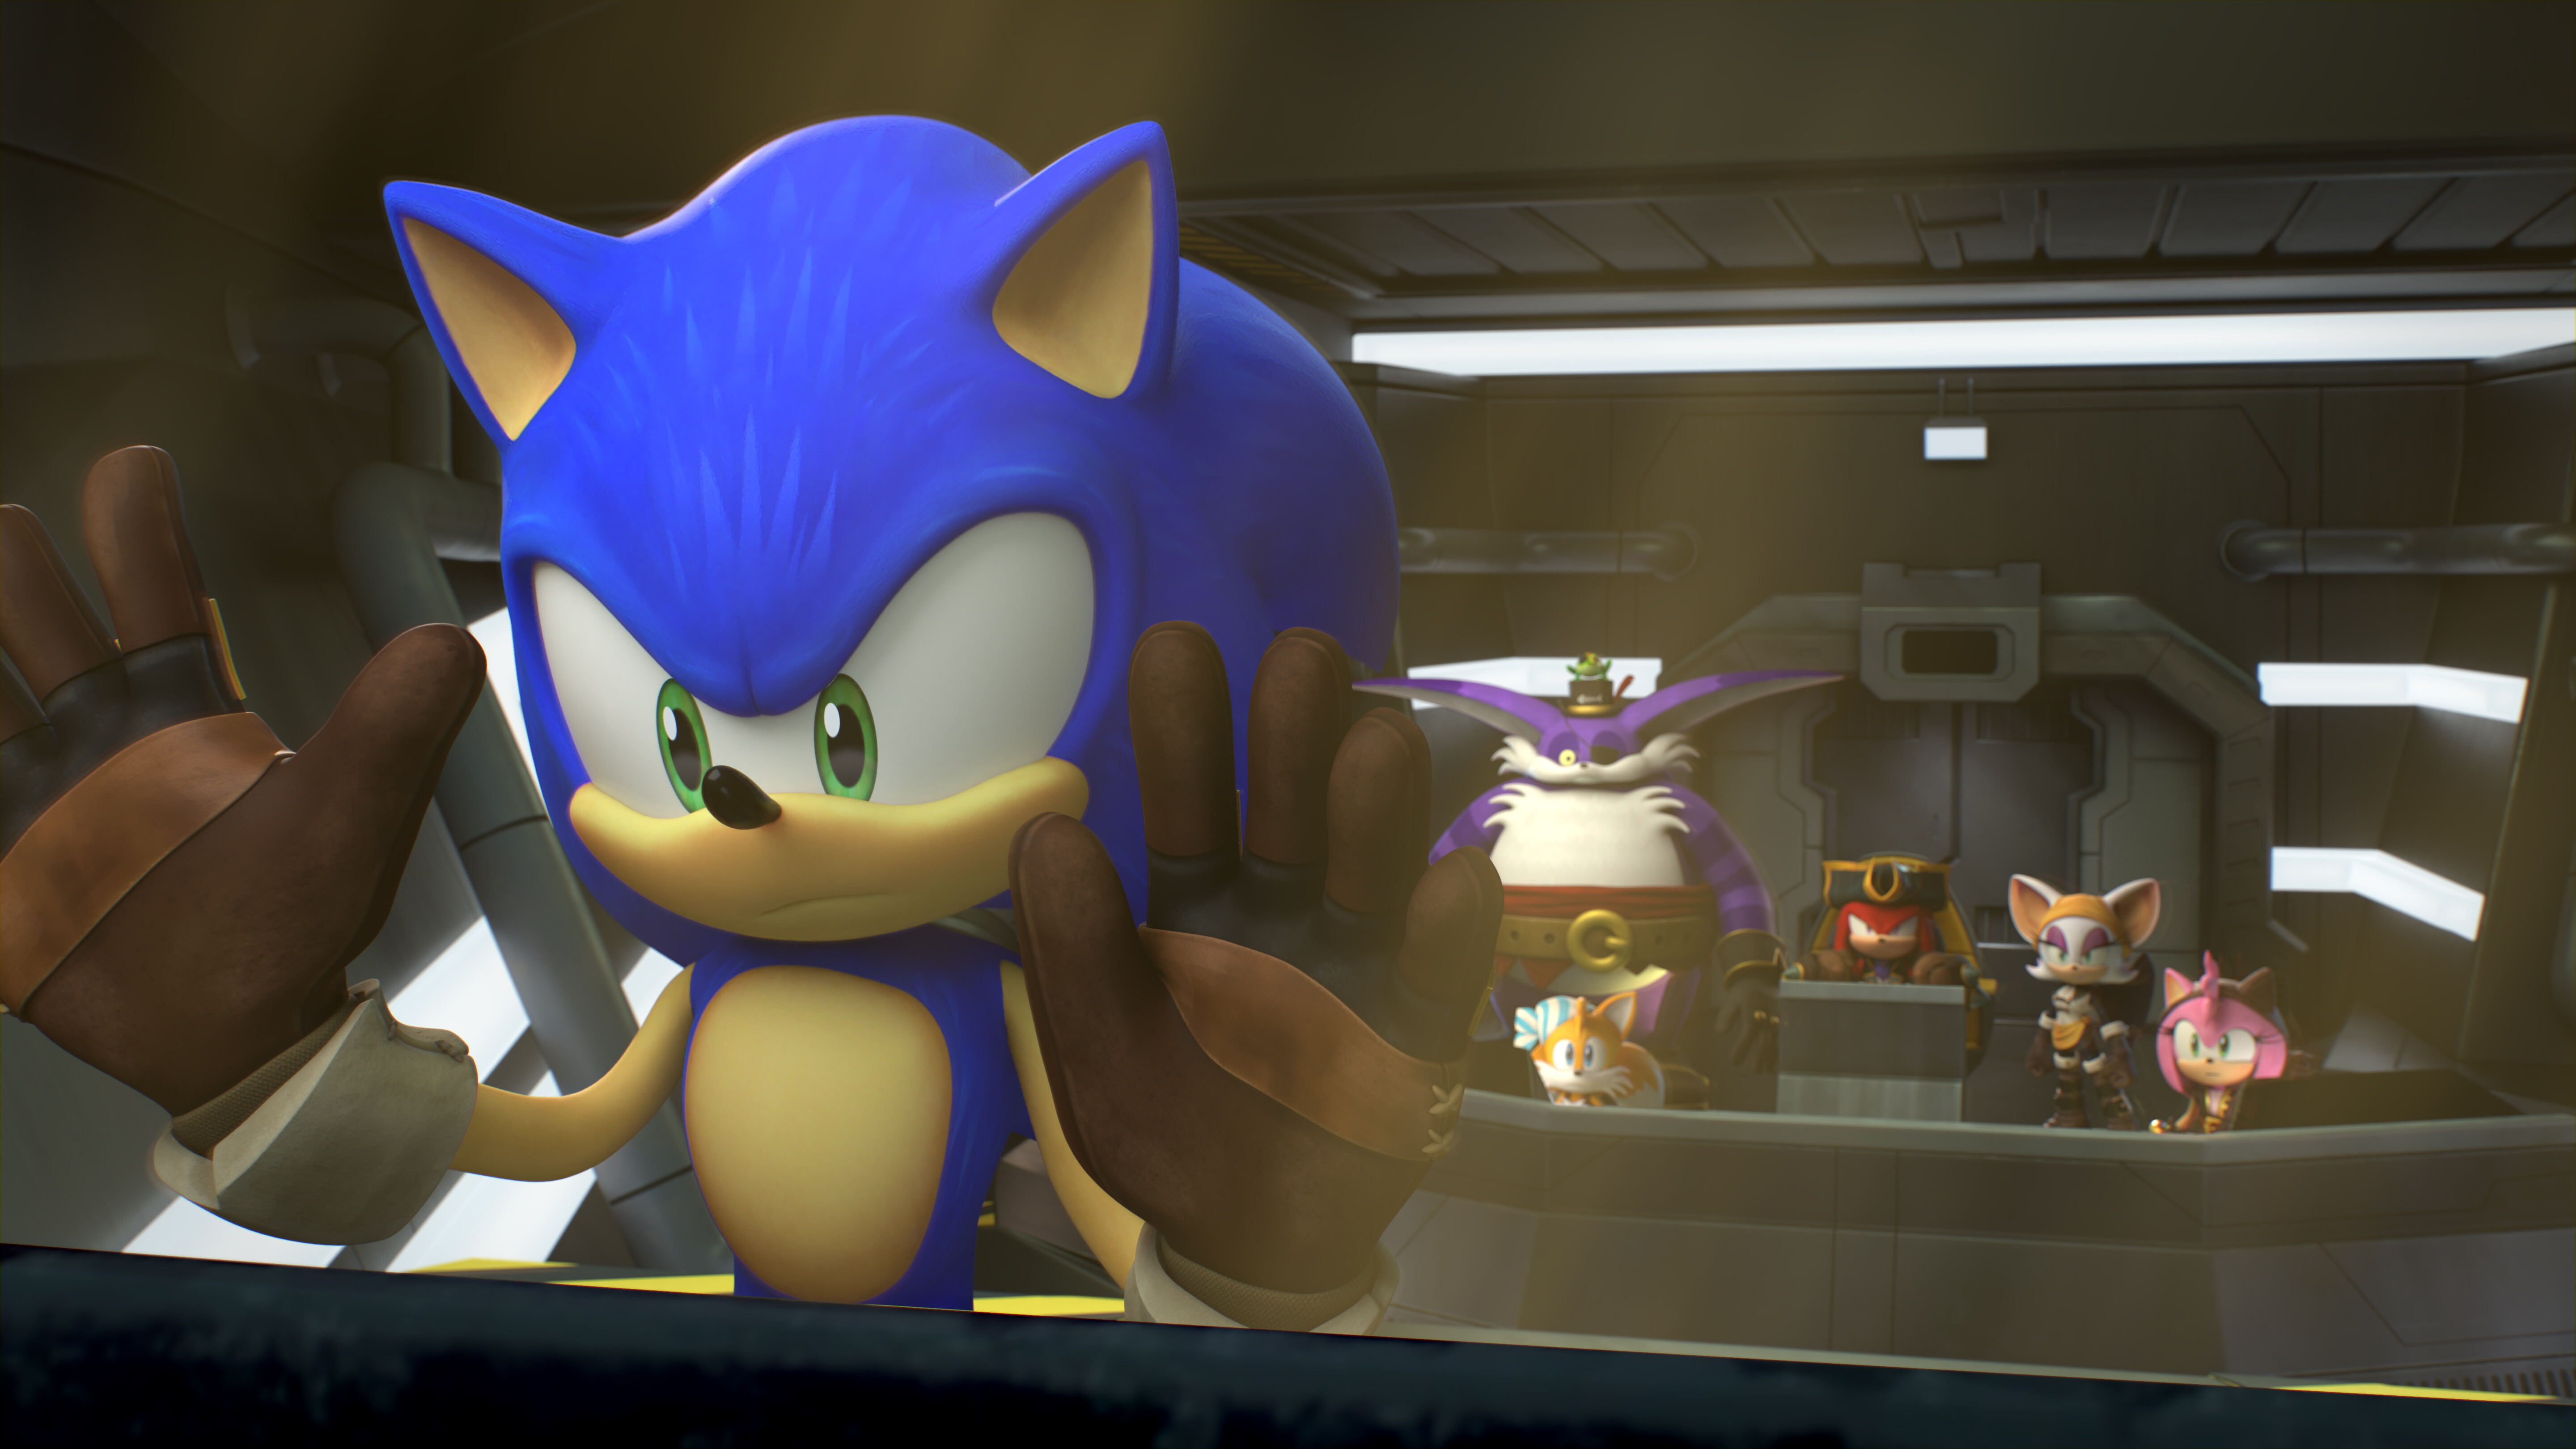 Netflix Released The Latest Trailer For 'Sonic Prime' Online